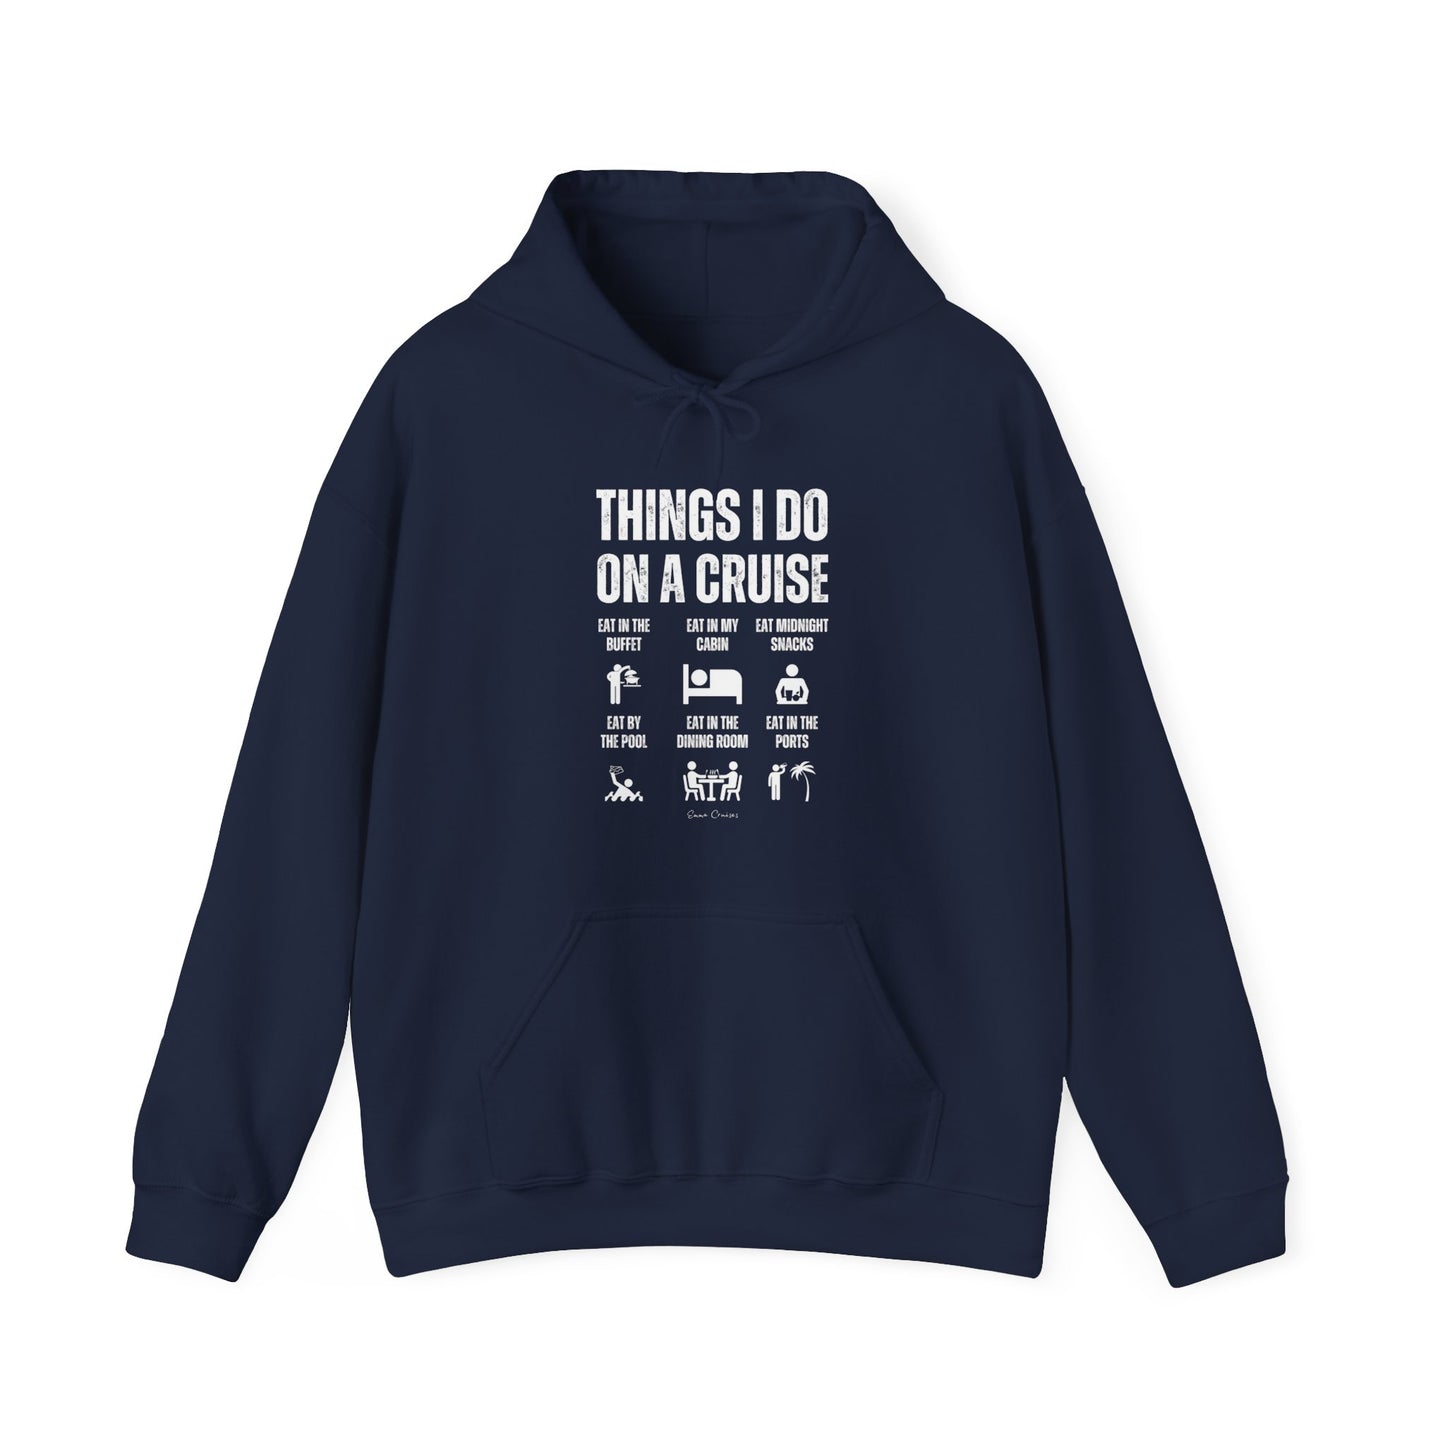 Things I Do on a Cruise - UNISEX Hoodie